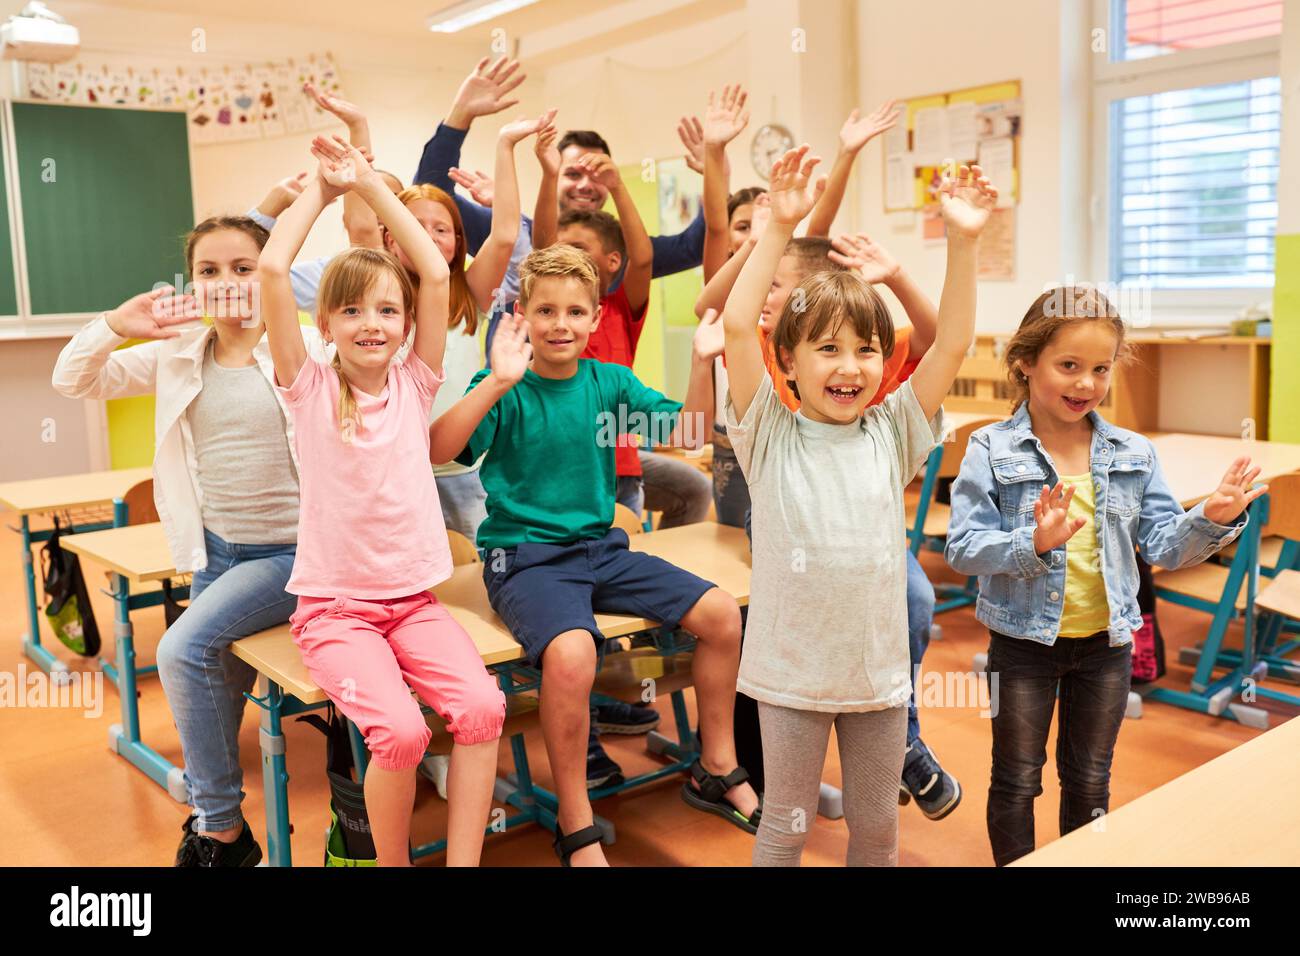 Group of male and female elementary students waving in classroom at school Stock Photo